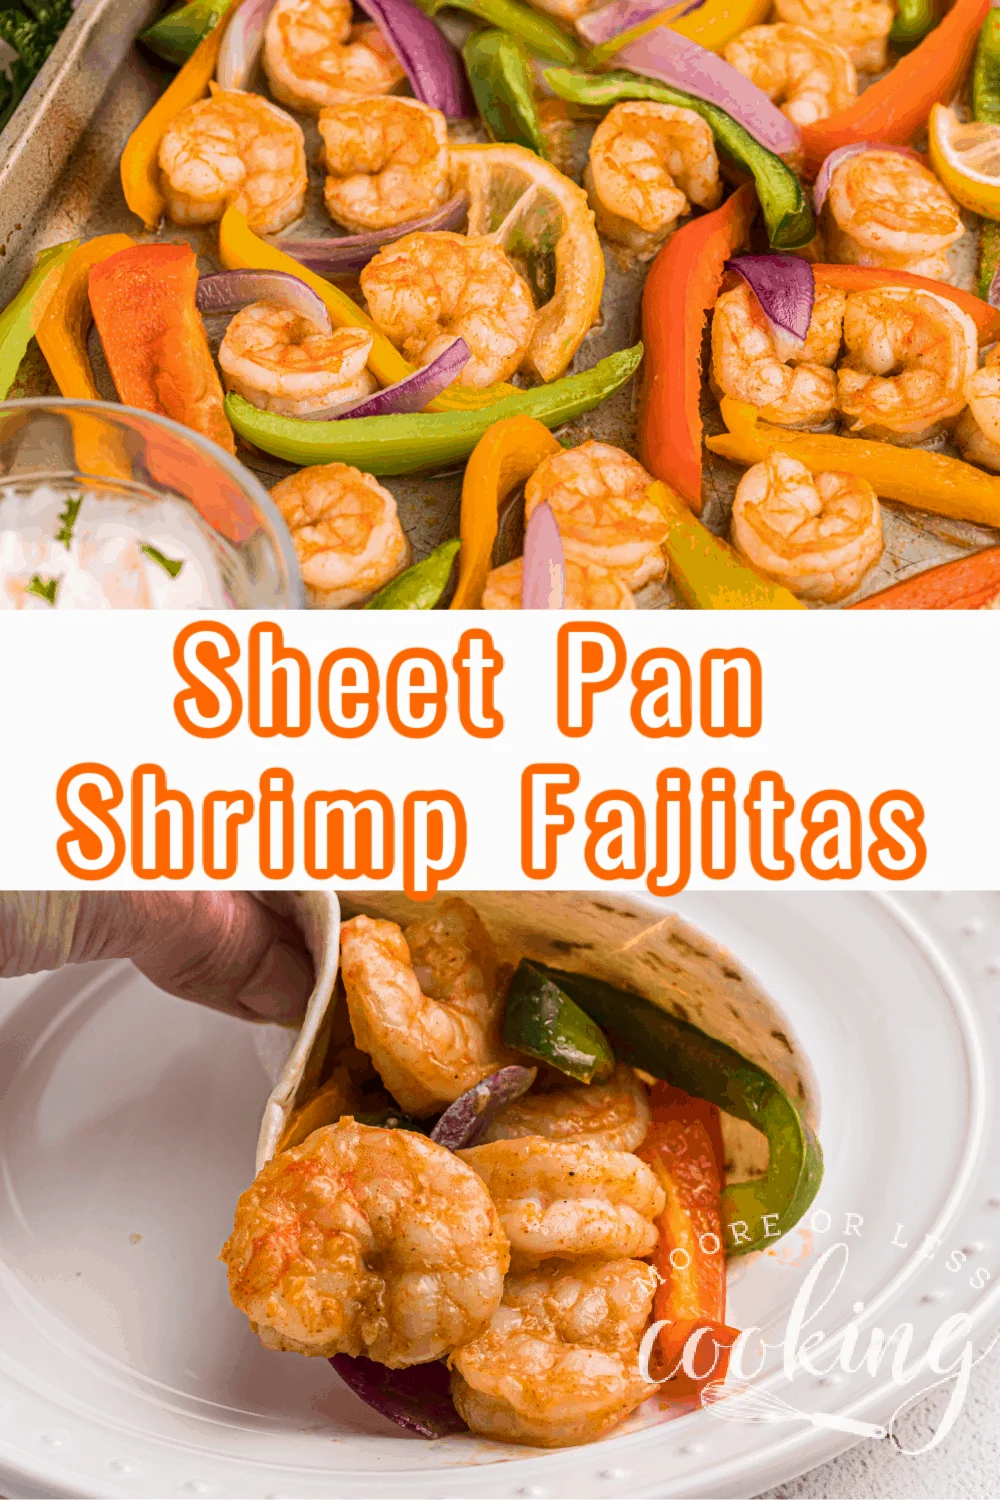 Sheet pan shrimp fajitas are a zesty and easy meal to make on busy weeknights. Ready in under 30 minutes, this Mexican-inspired sheet pan seafood recipe is a flavorful and healthy way to enjoy the combo of shrimp, onions, and peppers. via @Mooreorlesscook